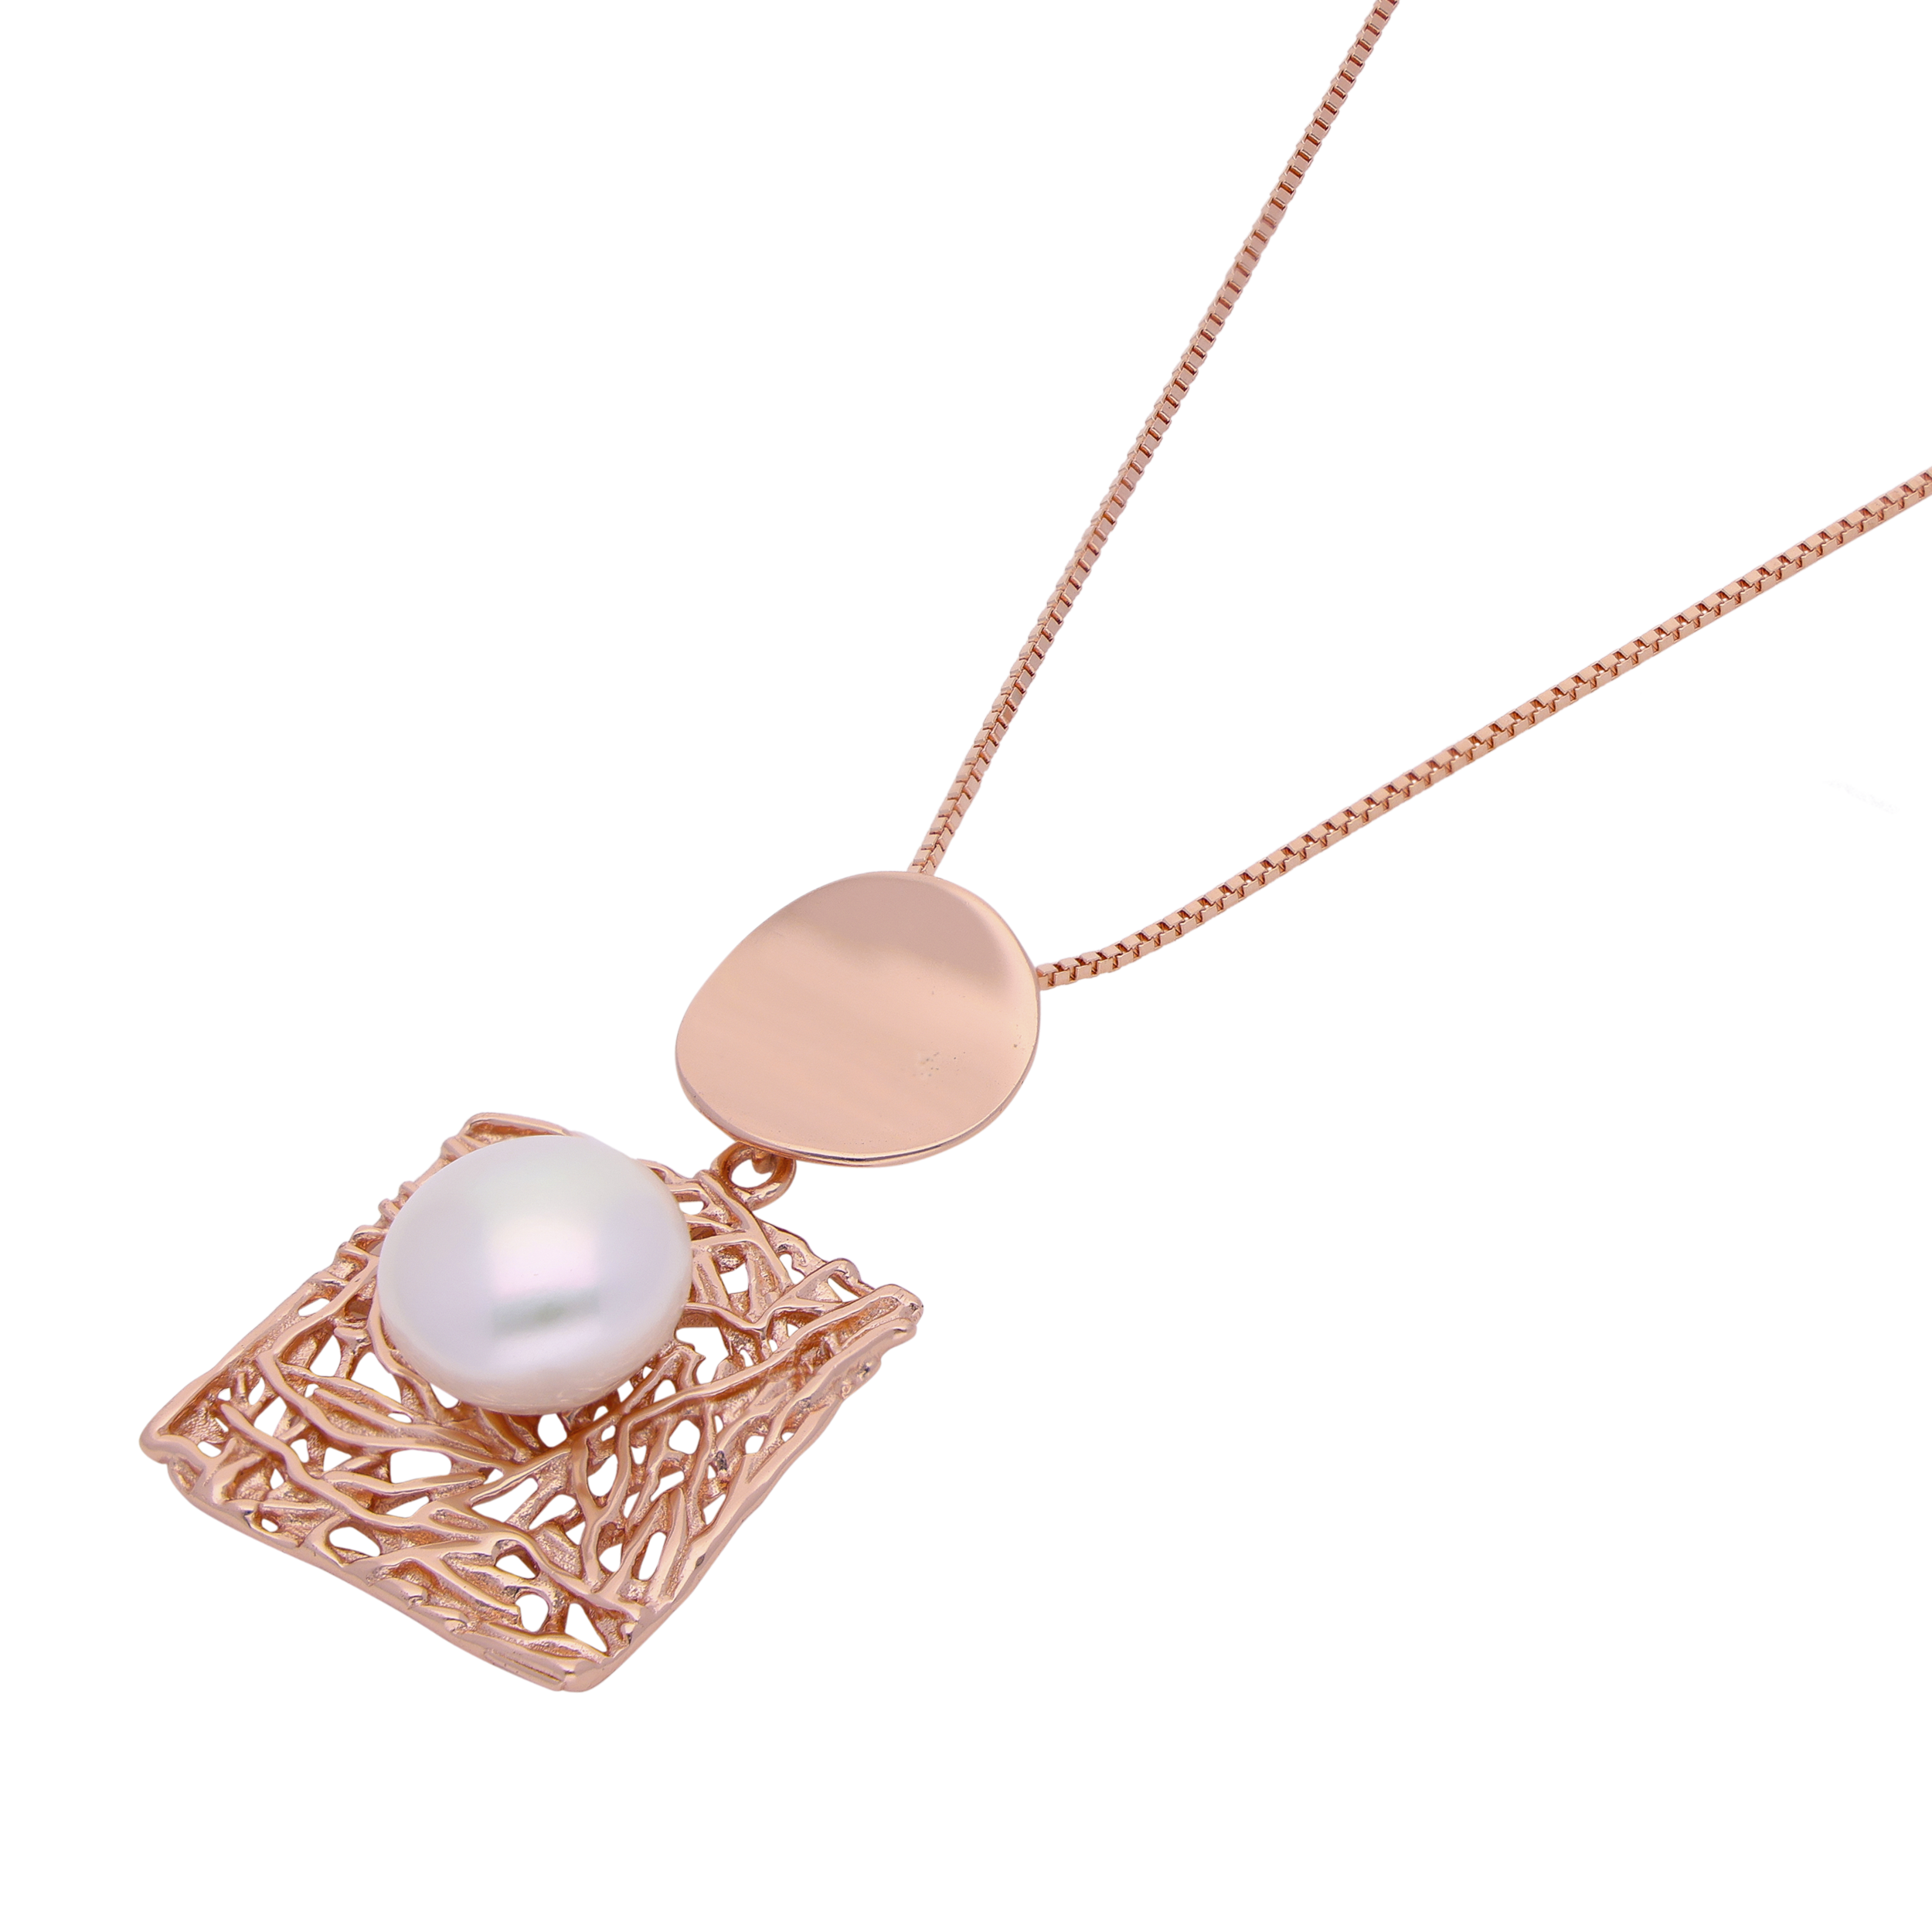 Pearl Radiance: Intricately Designed Sterling Silver Pendant with Rose Gold Polish and Pearl Accent | SKU : 0019892214, 0019892207